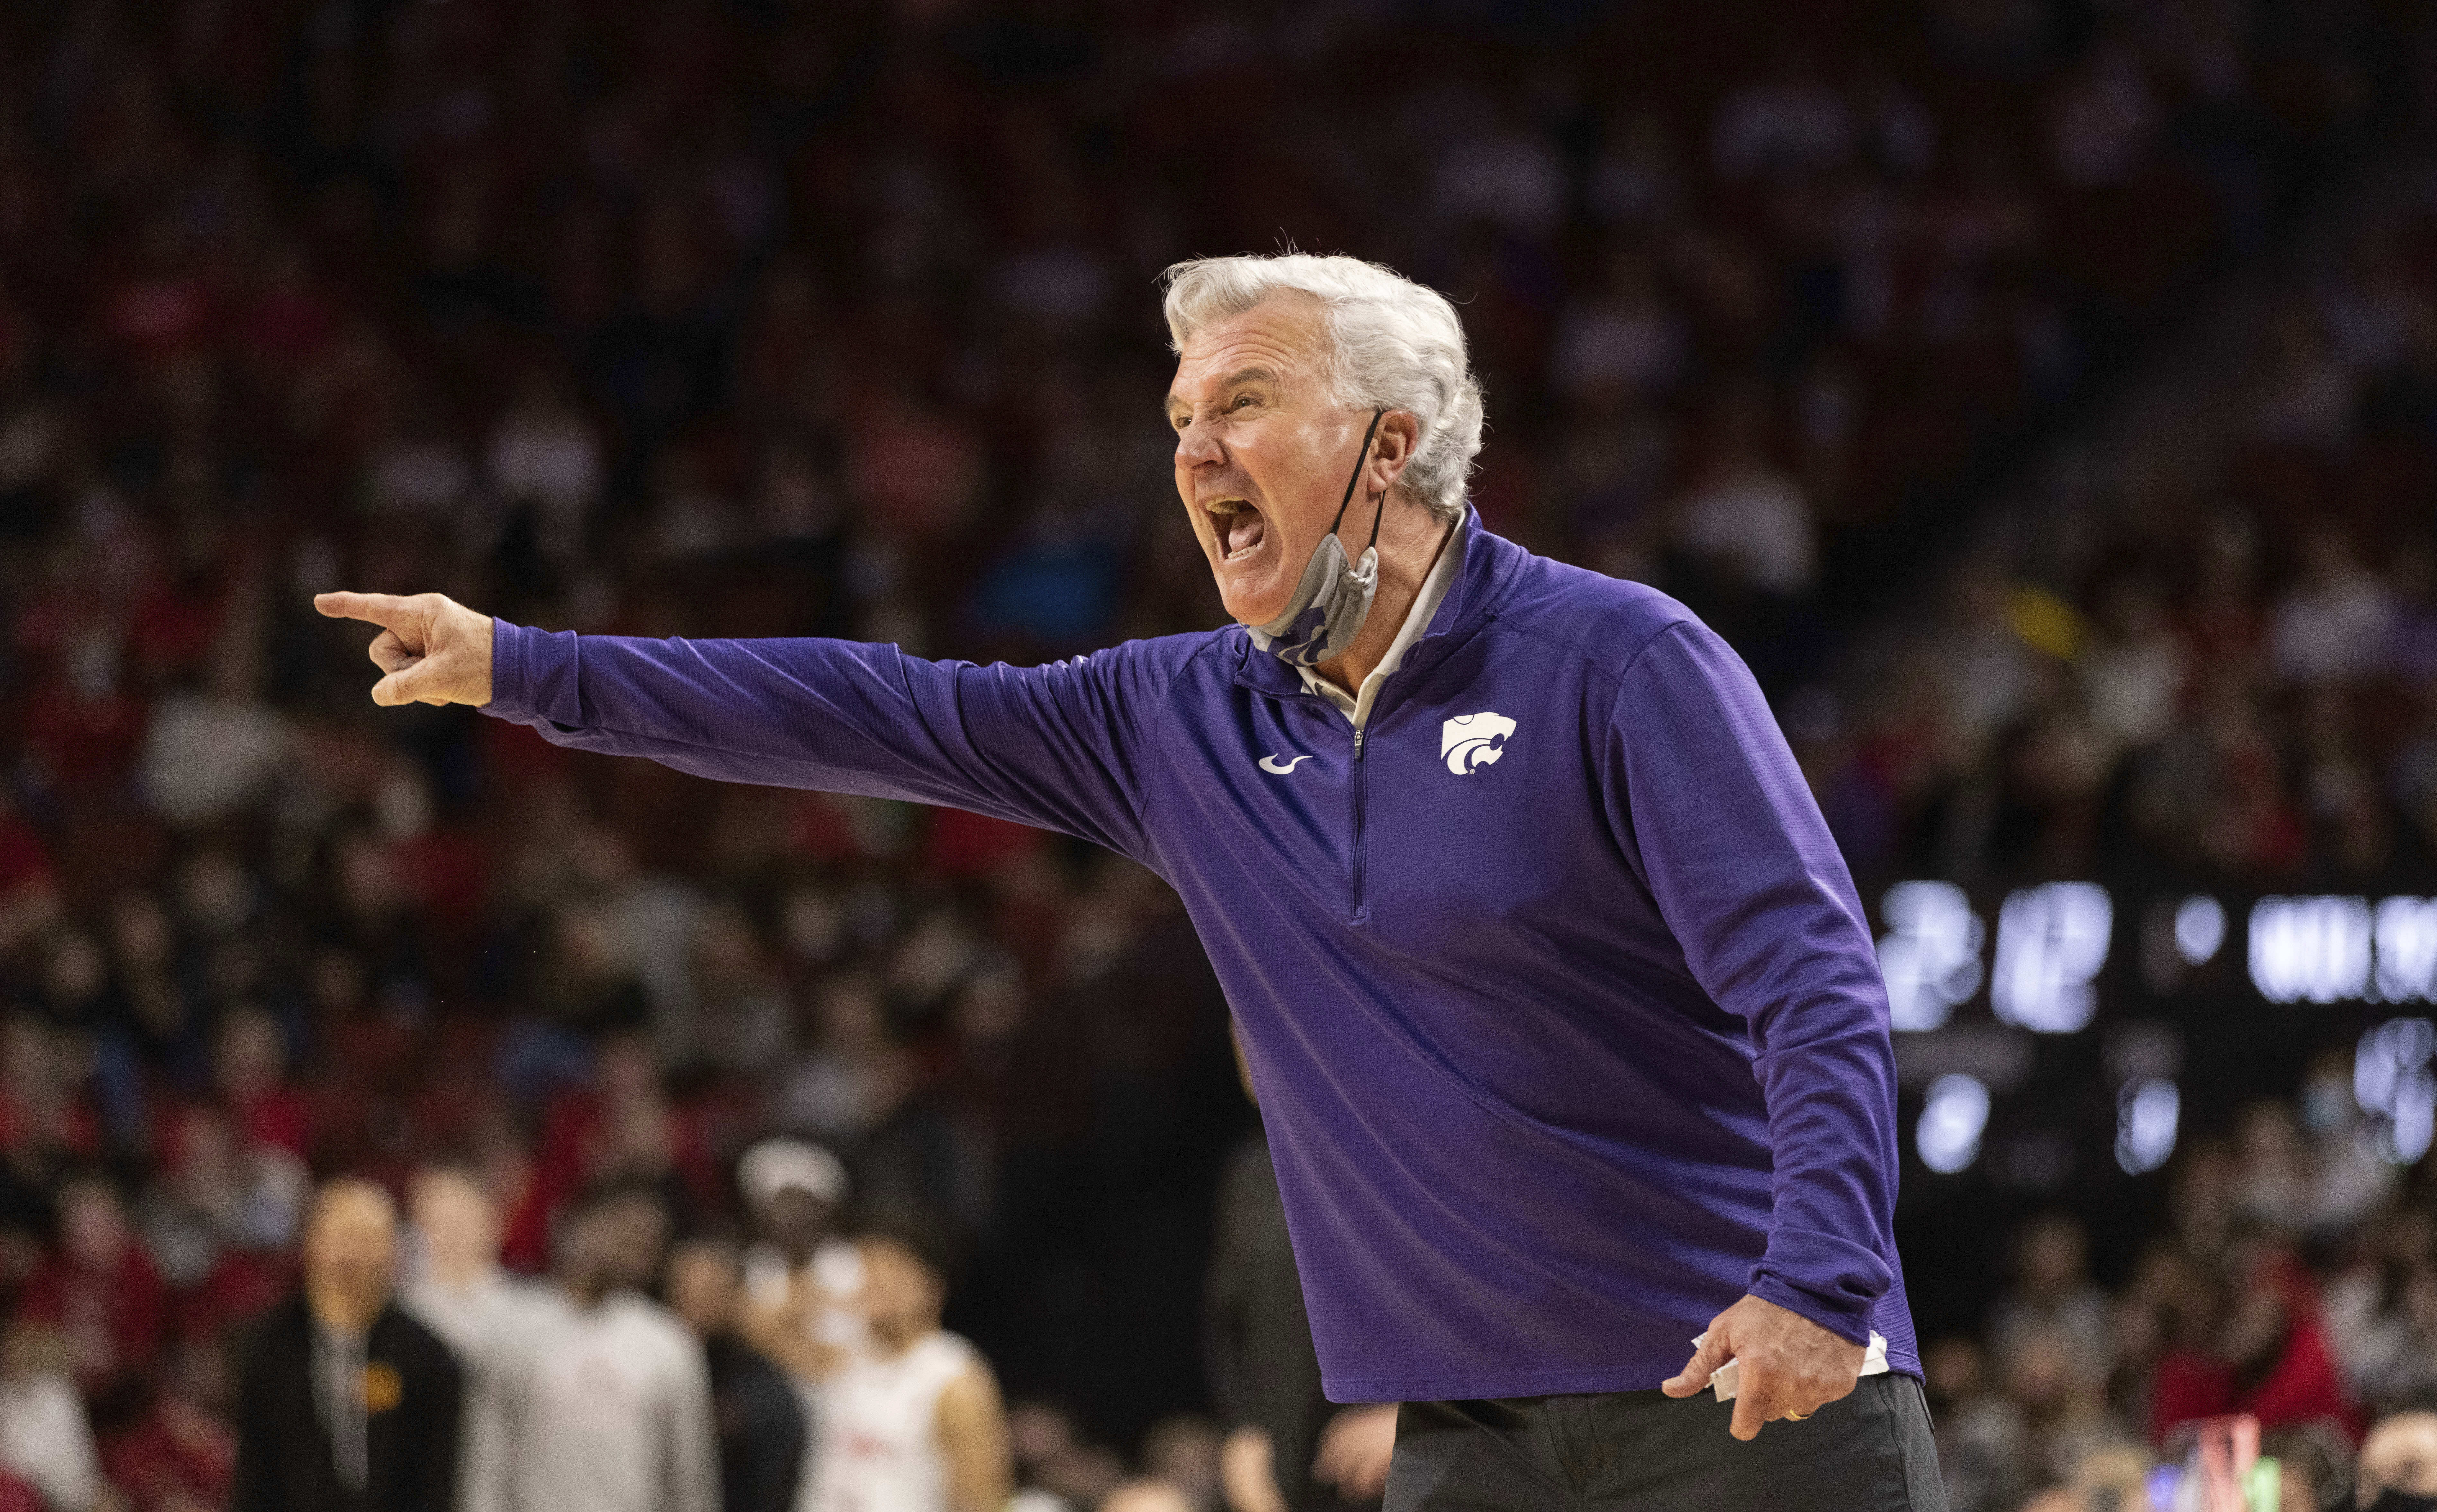 K-State head coach Bruce Weber, 7 players will miss game against Texas